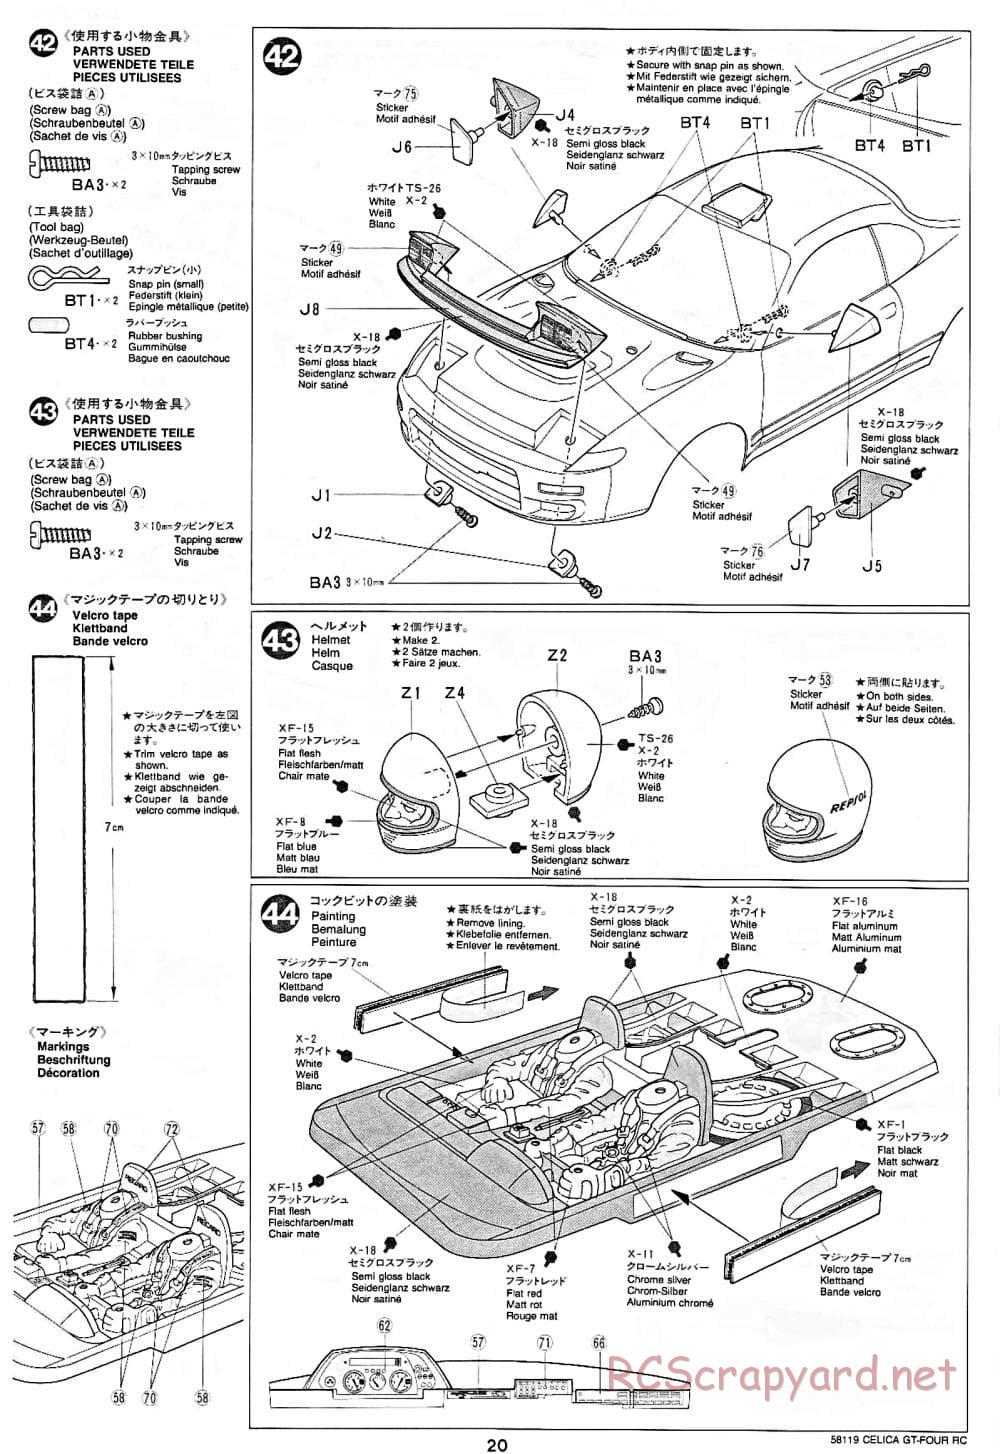 Tamiya - Toyota Celica GT-Four RC - TA-01 Chassis - Manual - Page 20